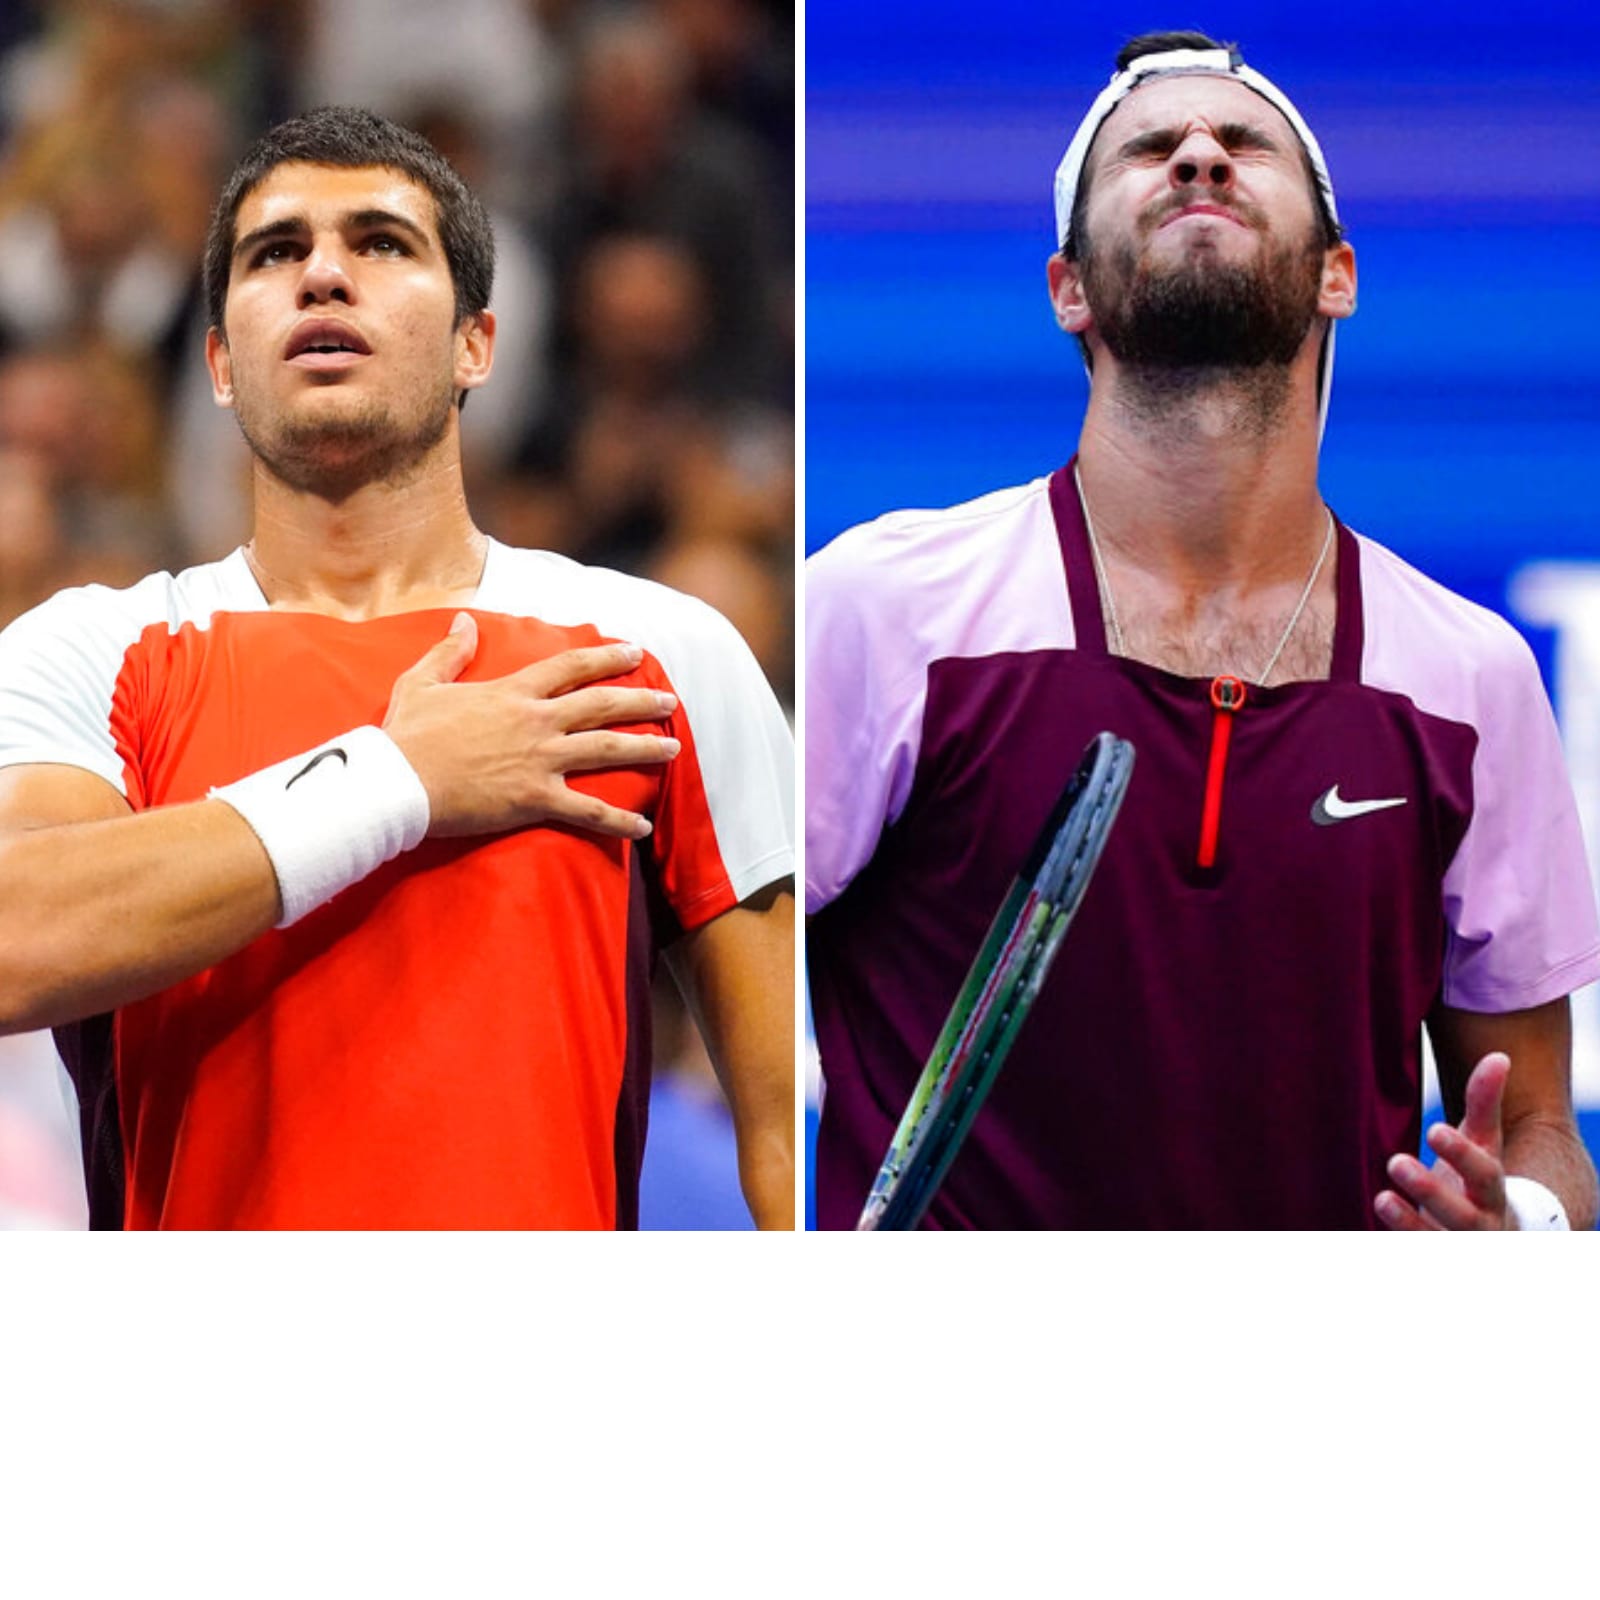 US Open 2022 Mens Singles Final, Carlos Alcaraz vs Casper Ruud Live Streaming When and Where to Watch?